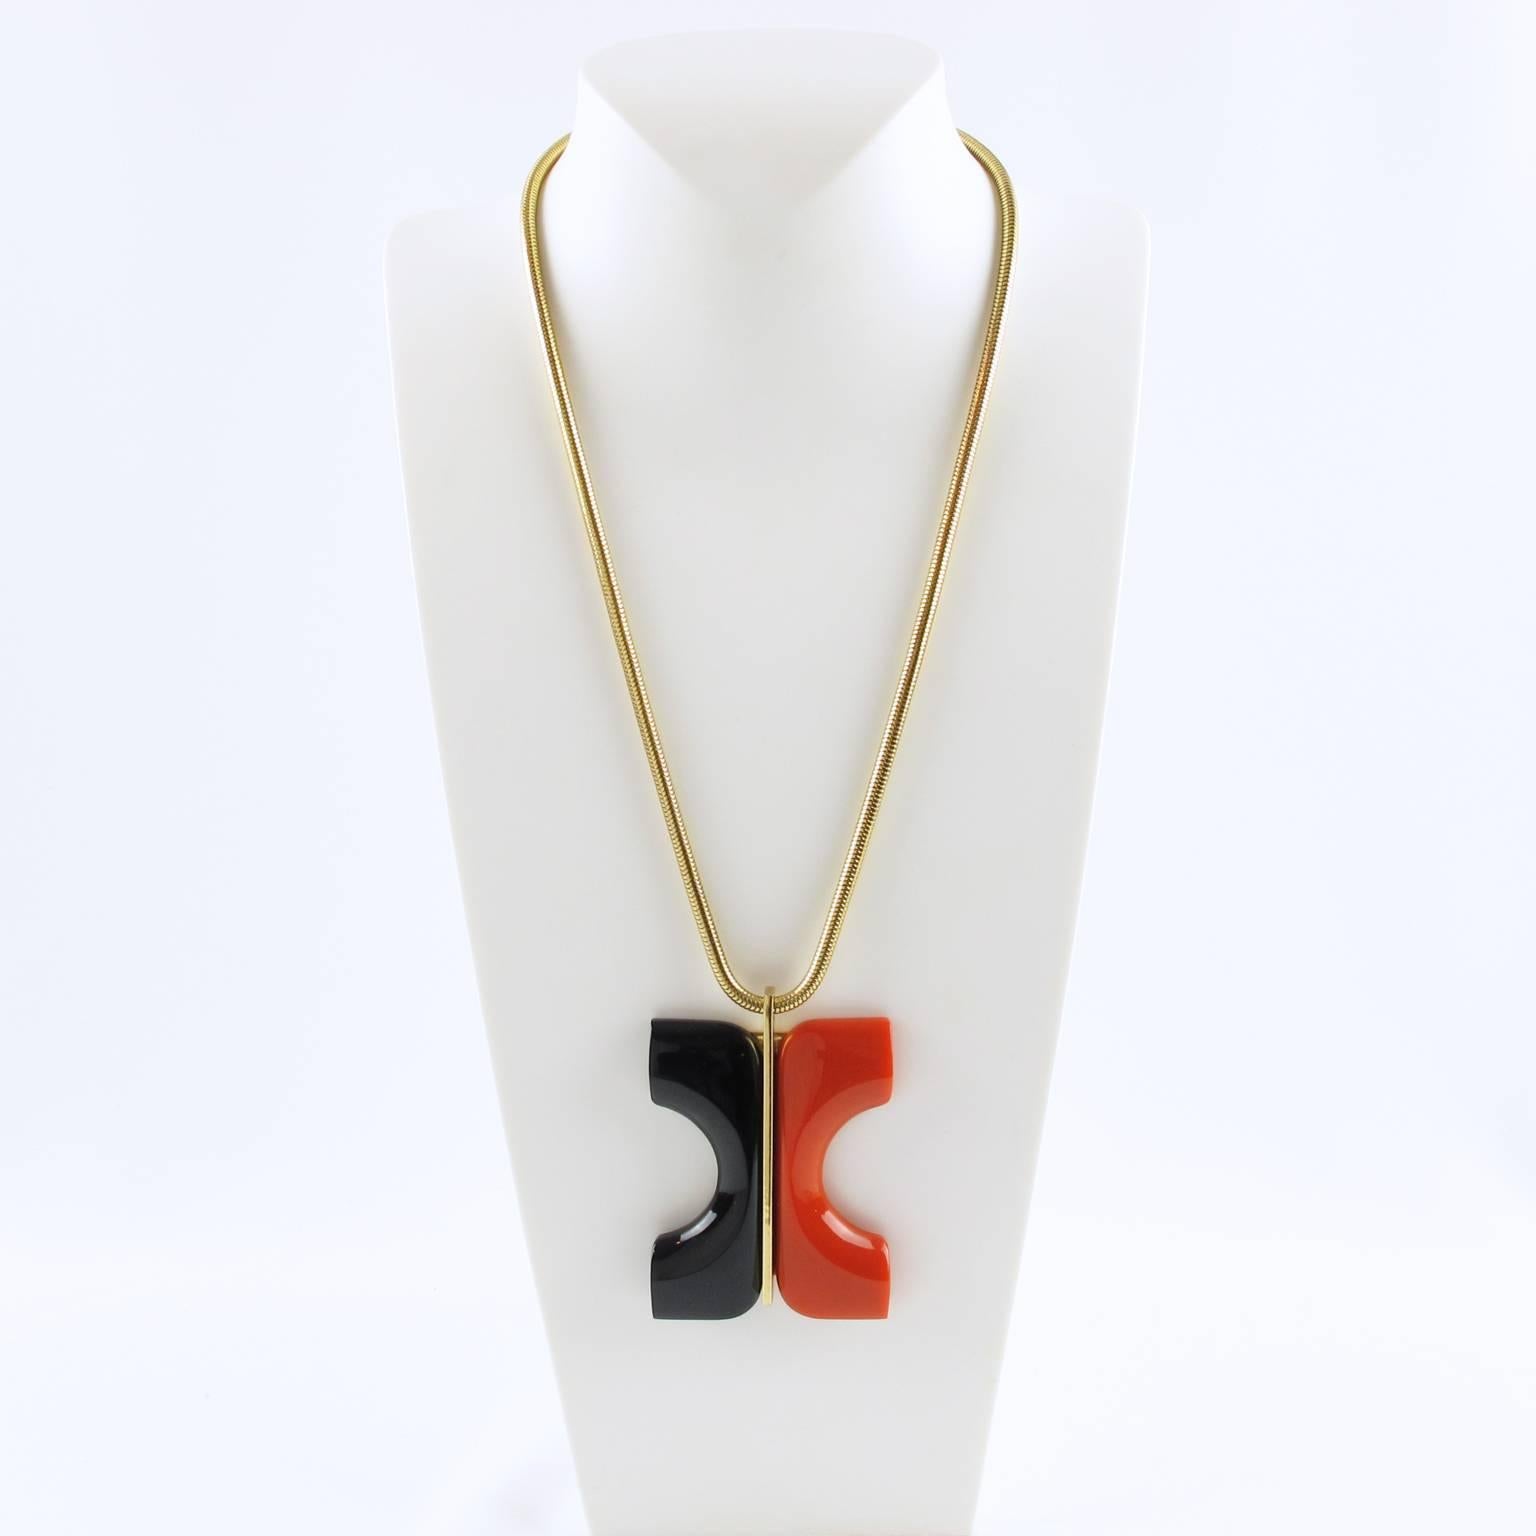 Rare Lanvin couture necklace. Vintage piece from the early 1970s featuring an oversized modernist pendant with architectural dimensional shape in black and orange tones. Original gilt metal snake chain. Lanvin Paris gilt tag attached to clasp. In